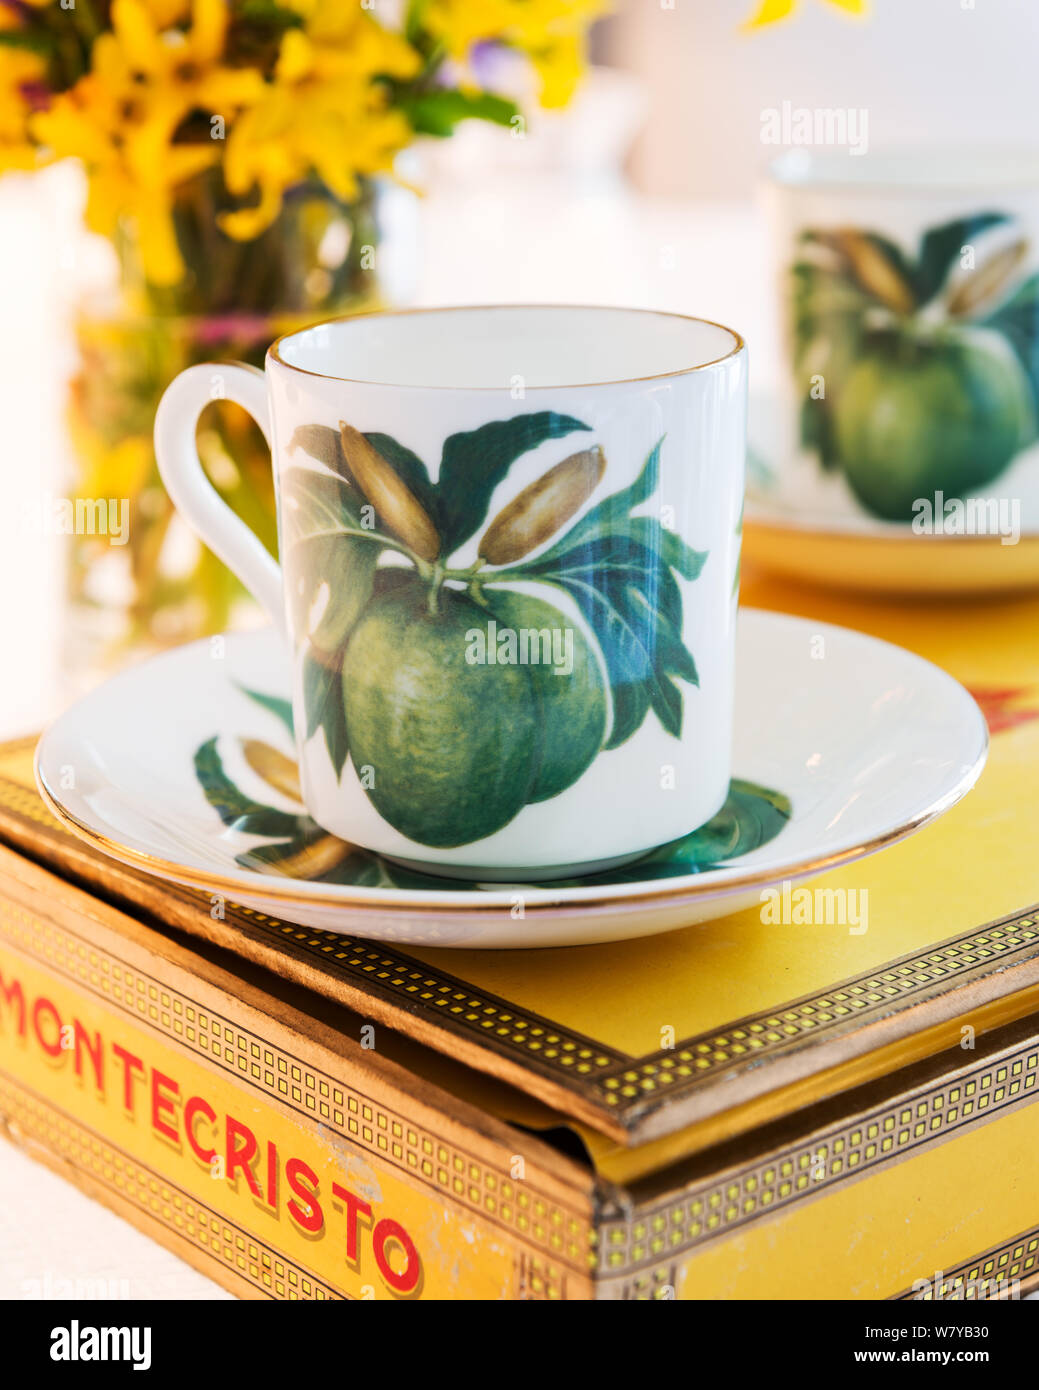 Coffee up from Jenny Mein's breadfruit collection on Montecristo cigar box Stock Photo